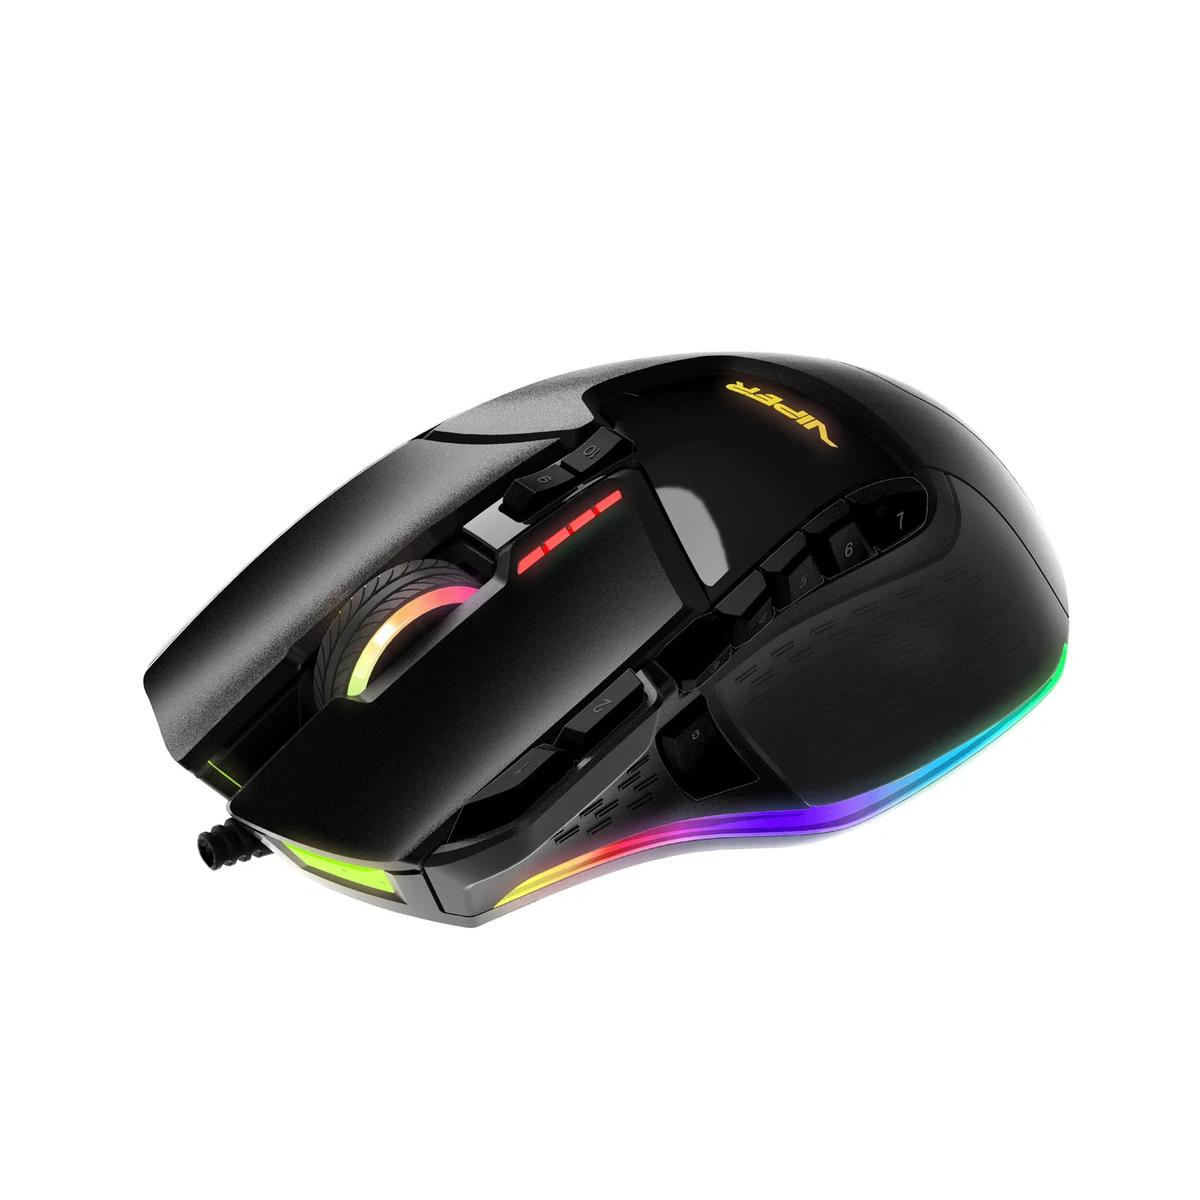 MOUSE GAMING VIPER V570 BLACKOUT EDITION 12000 DPI RGB CON SOFTWARE PERSONALIZABLE FPS MMO HIBRIDO 13 BOTONES - PV570LUXWAK